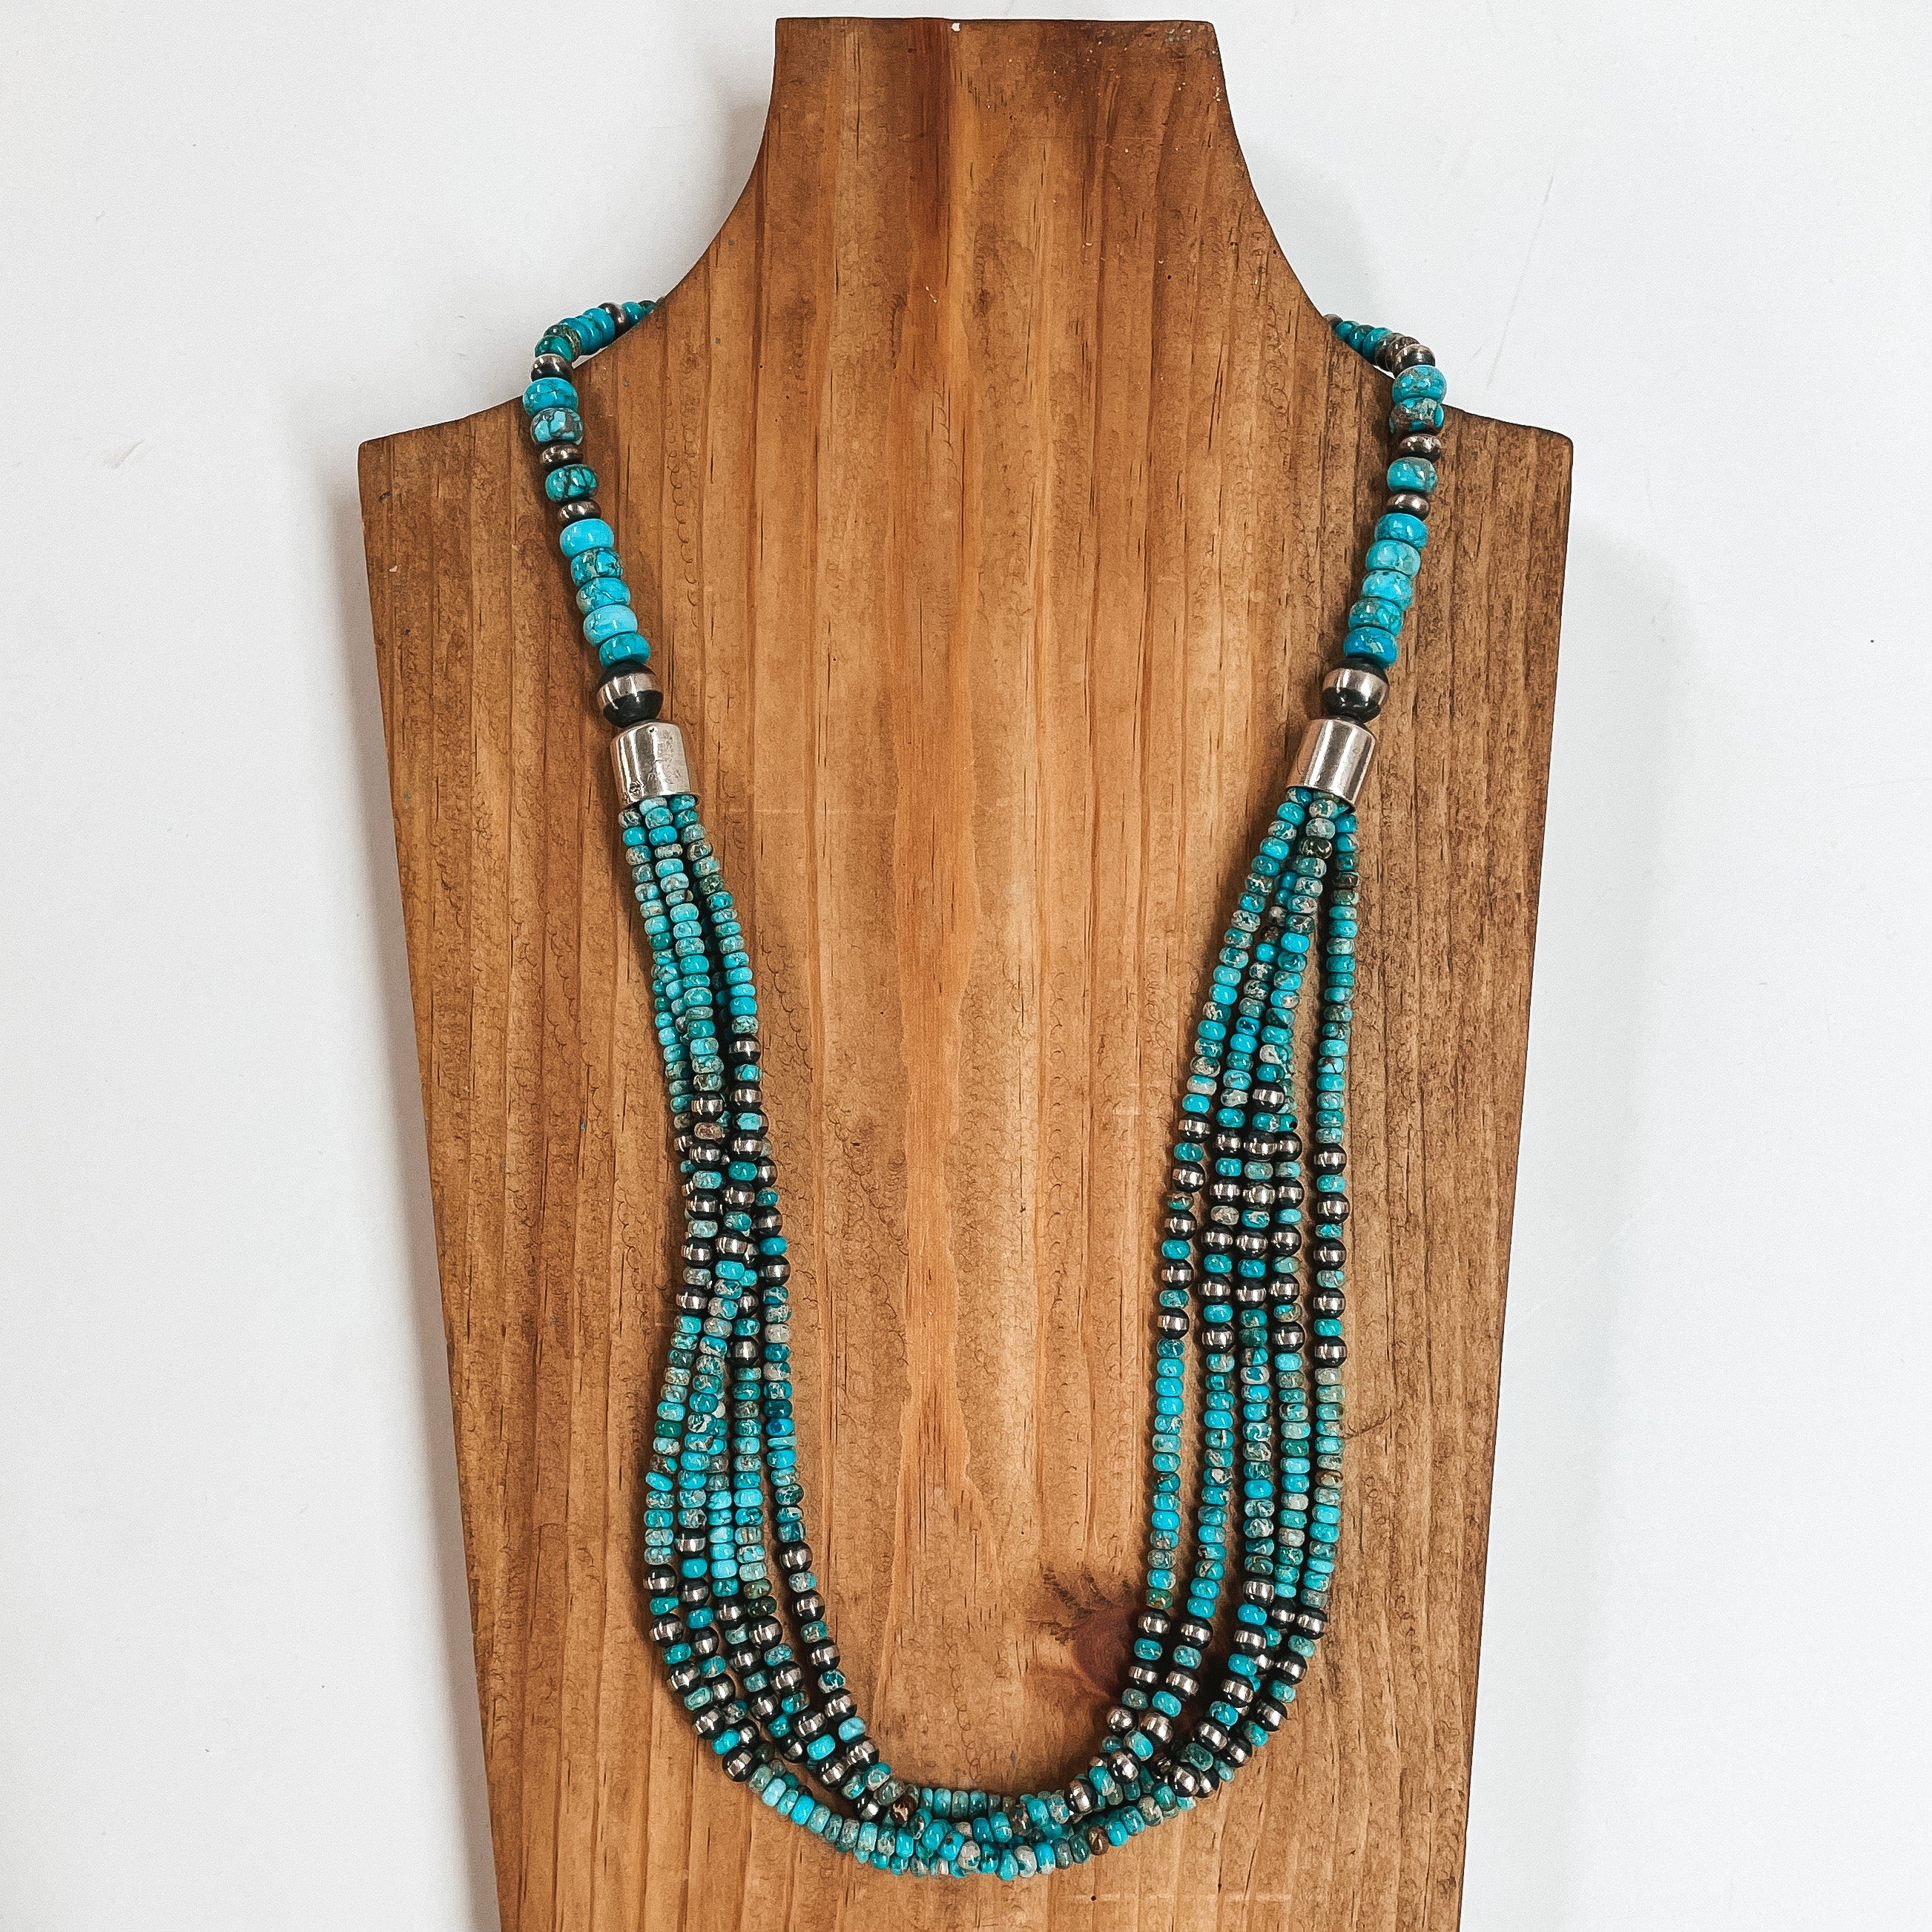 Navajo | Navajo Handmade Sterling Silver Multi Strand Turquoise Beaded Necklace with Navajo Pearls